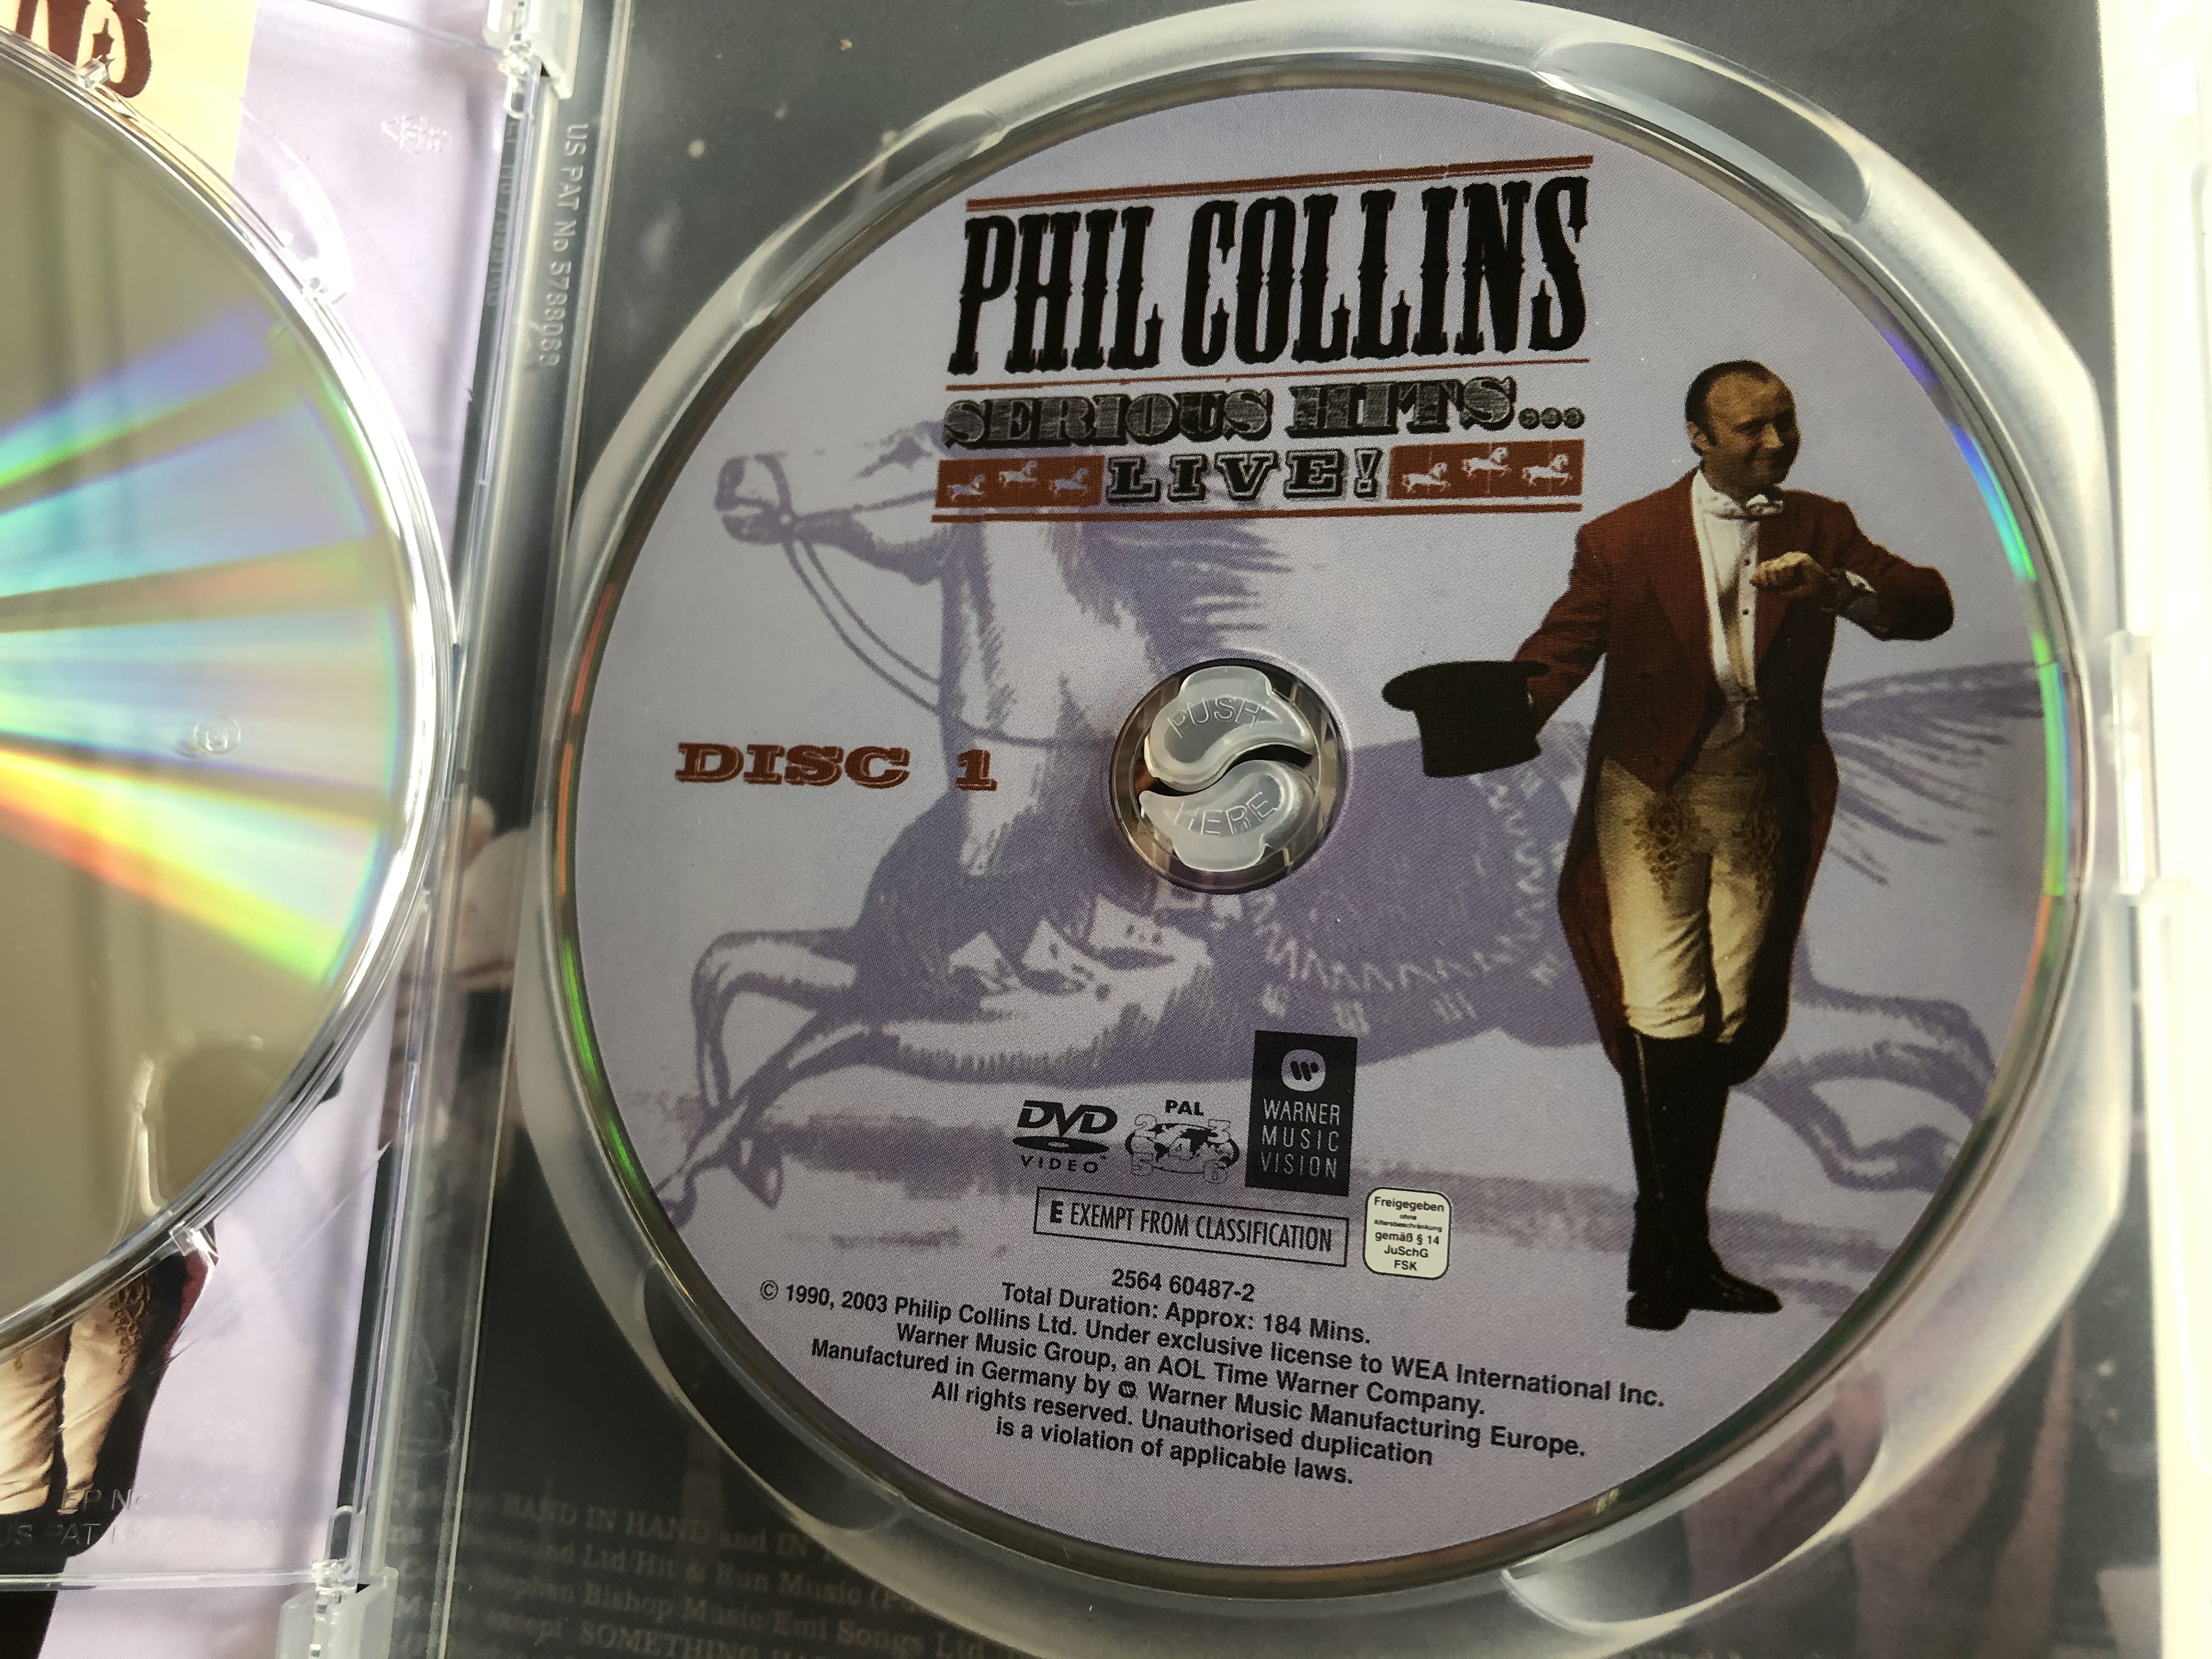 Phil Collins Serious Hits Live DVD 2003 / The 10 Serious Guys and 1 even  more serious Gal / 2 DVD SET - bibleinmylanguage